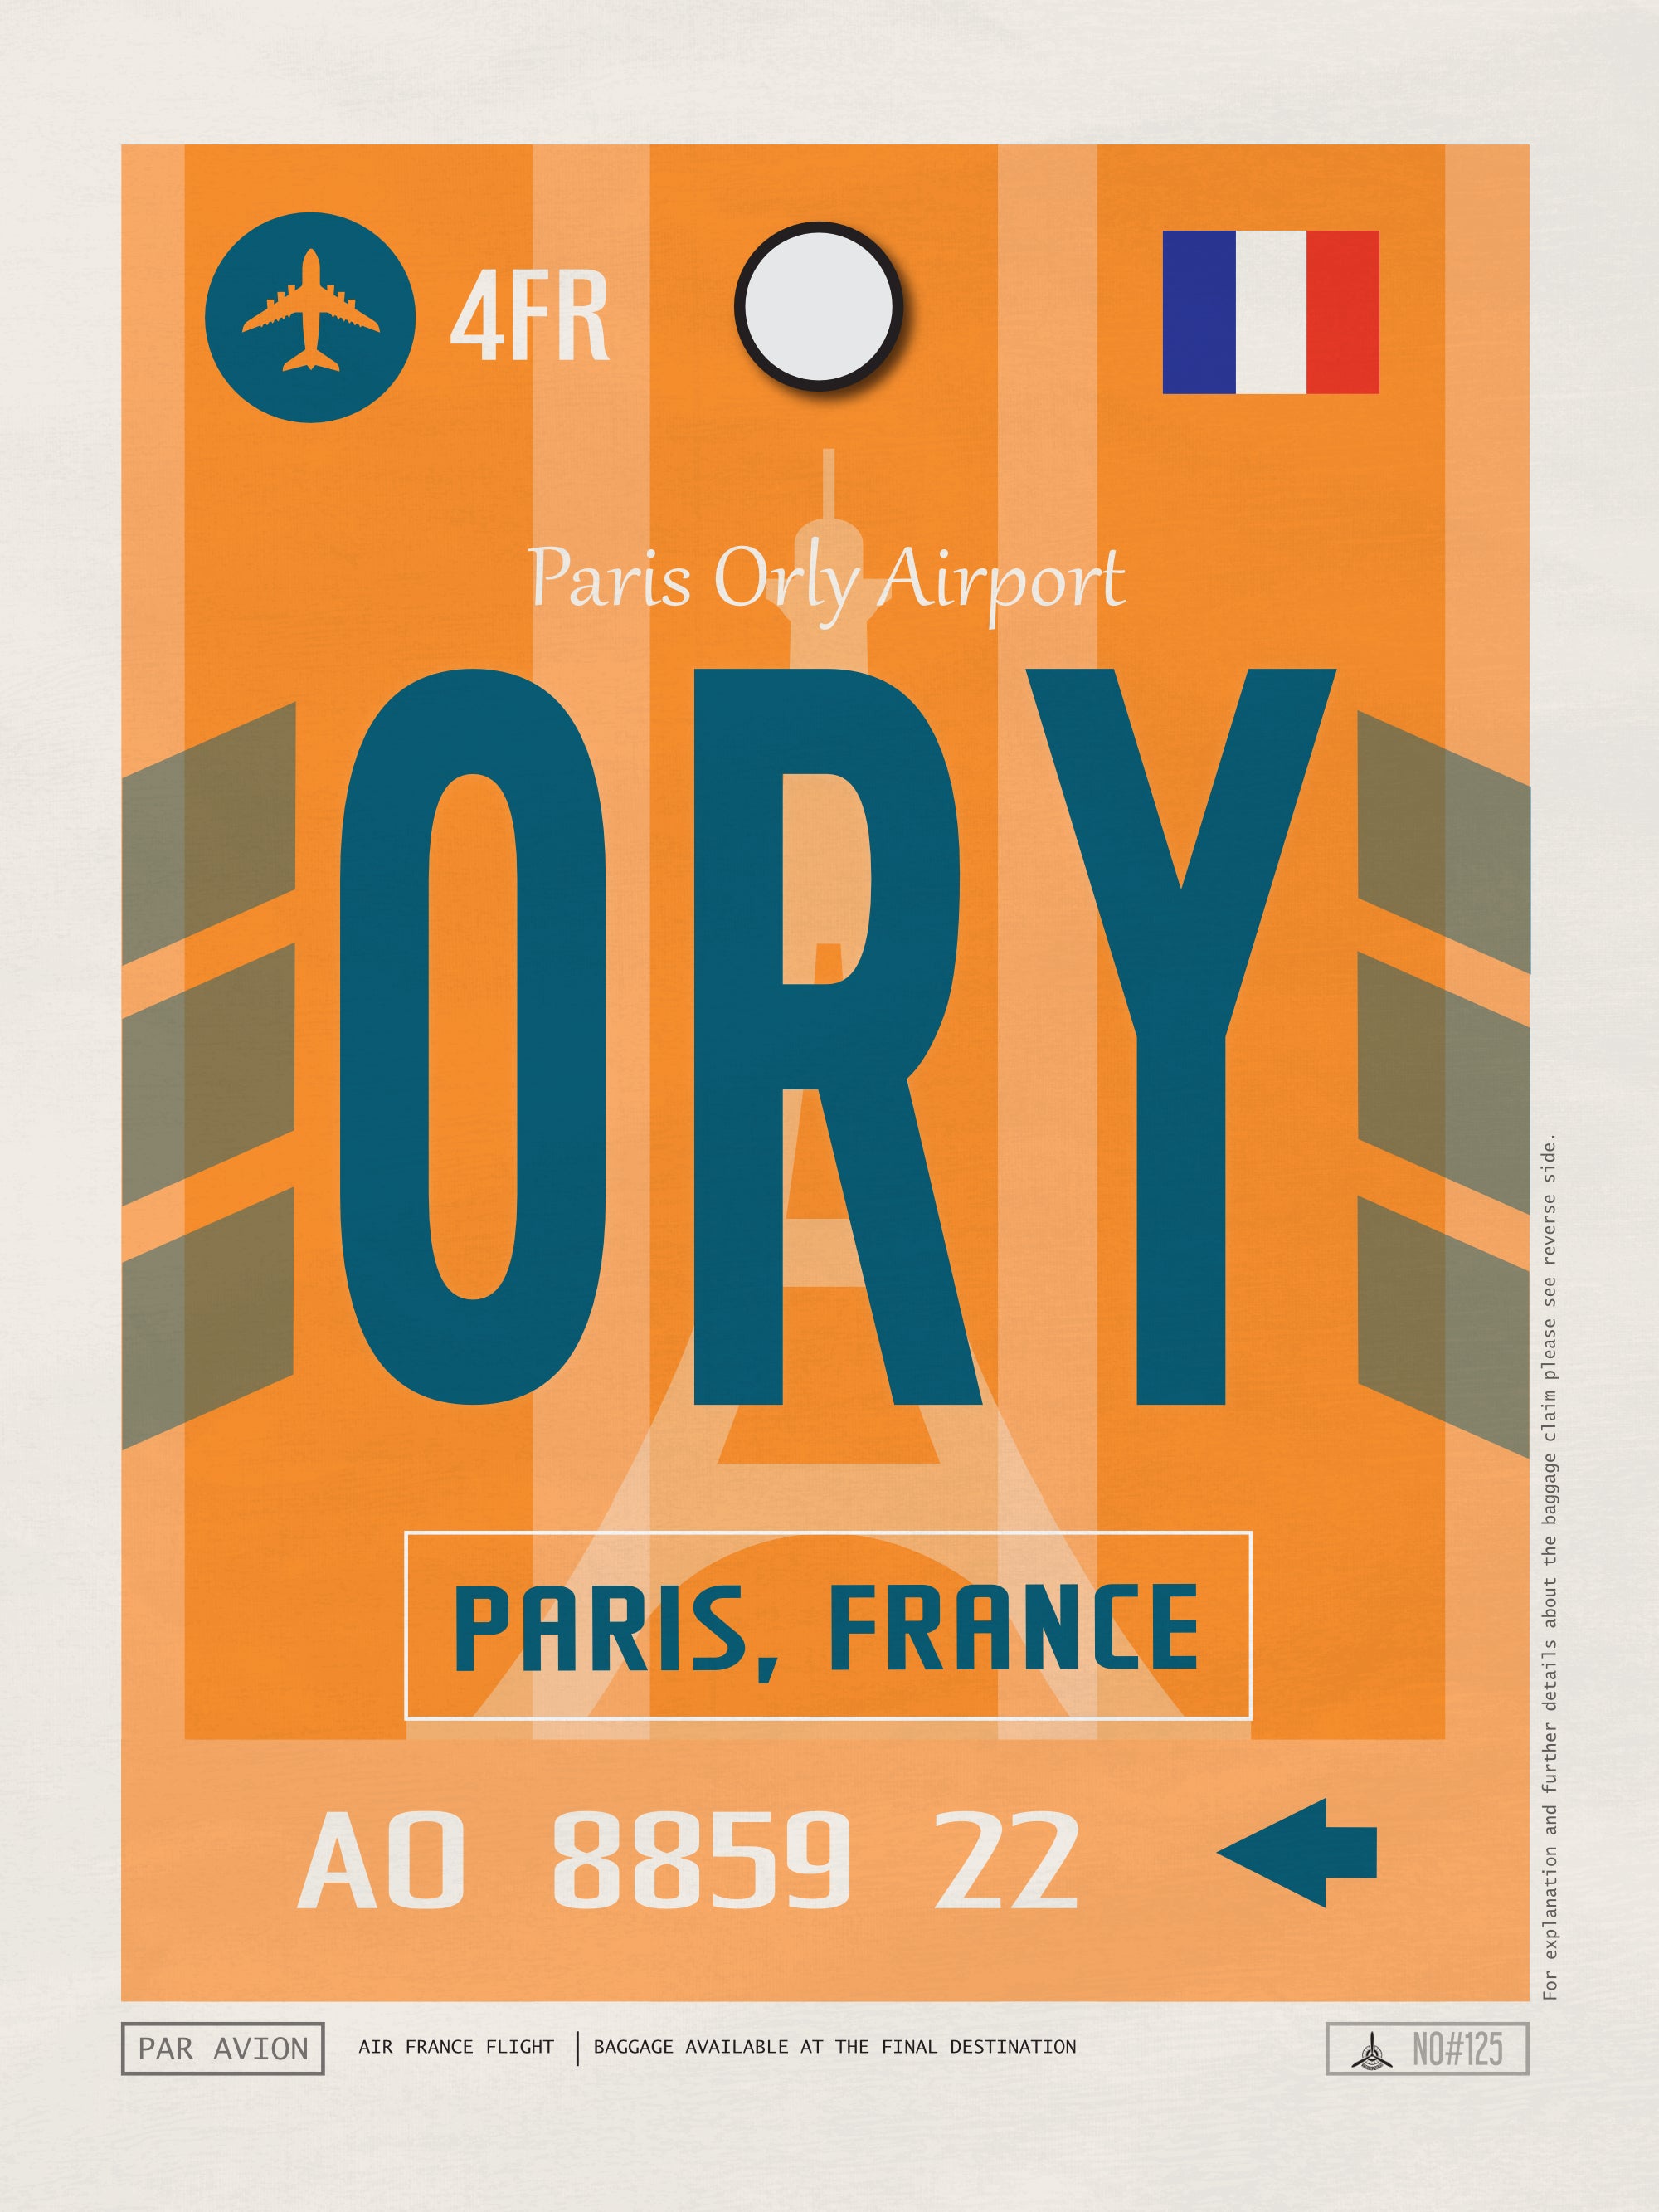 Paris, France - ORY Airport Code Poster